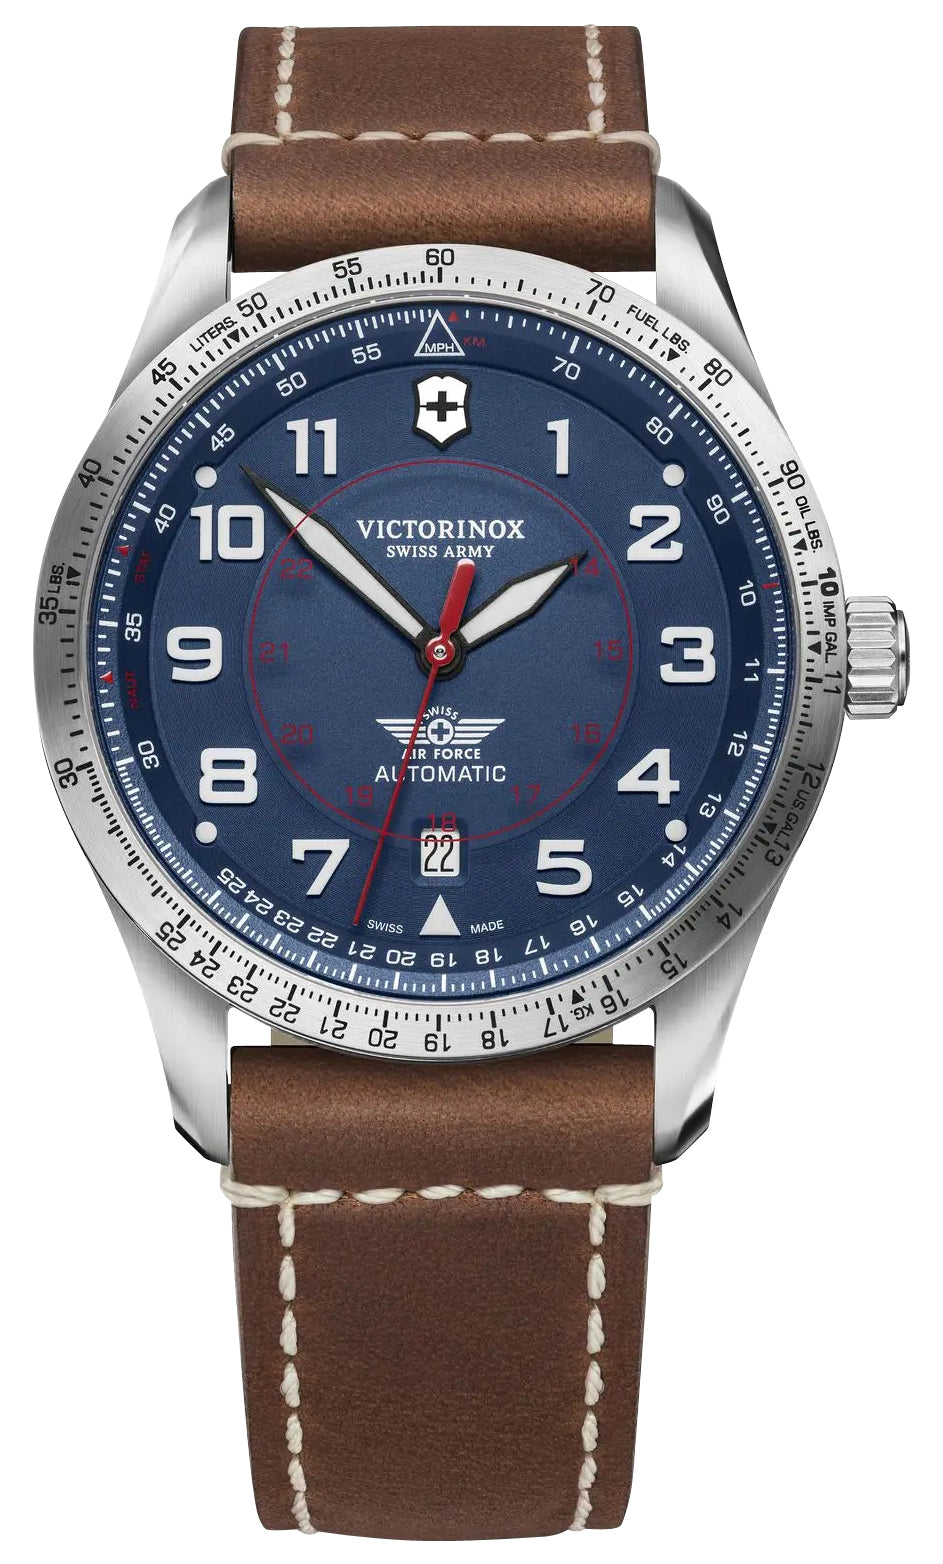 update alt-text with template Watches - Mens-Victorinox Swiss Army-241887-24-hour display, 40 - 45 mm, Airboss, bi-directional rotating bezel, blue, date, leather, mens, menswatches, new arrivals, round, rpSKU_241973, rpSKU_751 7697 4164-FS-OLIVE, rpSKU_751 7697 4164-MB, rpSKU_XL.1202, rpSKU_XL.1207, stainless steel case, swiss automatic, Victorinox Swiss Army, watches-Watches & Beyond